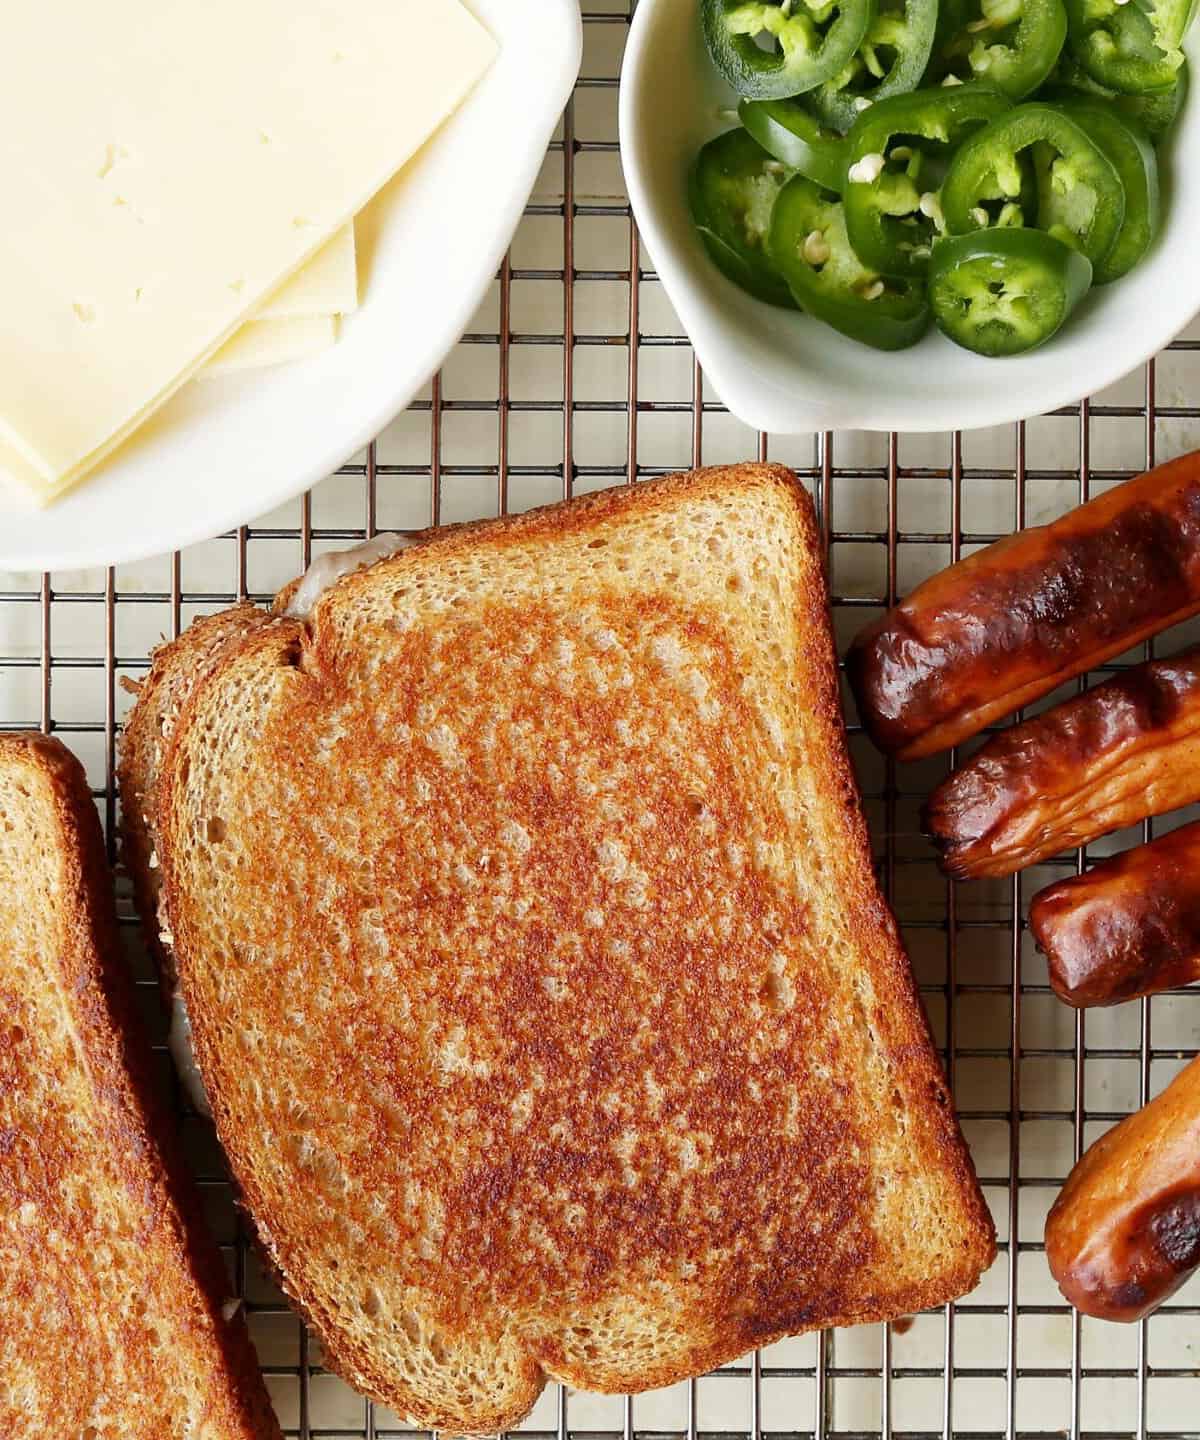  The ultimate comfort food combo: grilled cheese and hot dog.